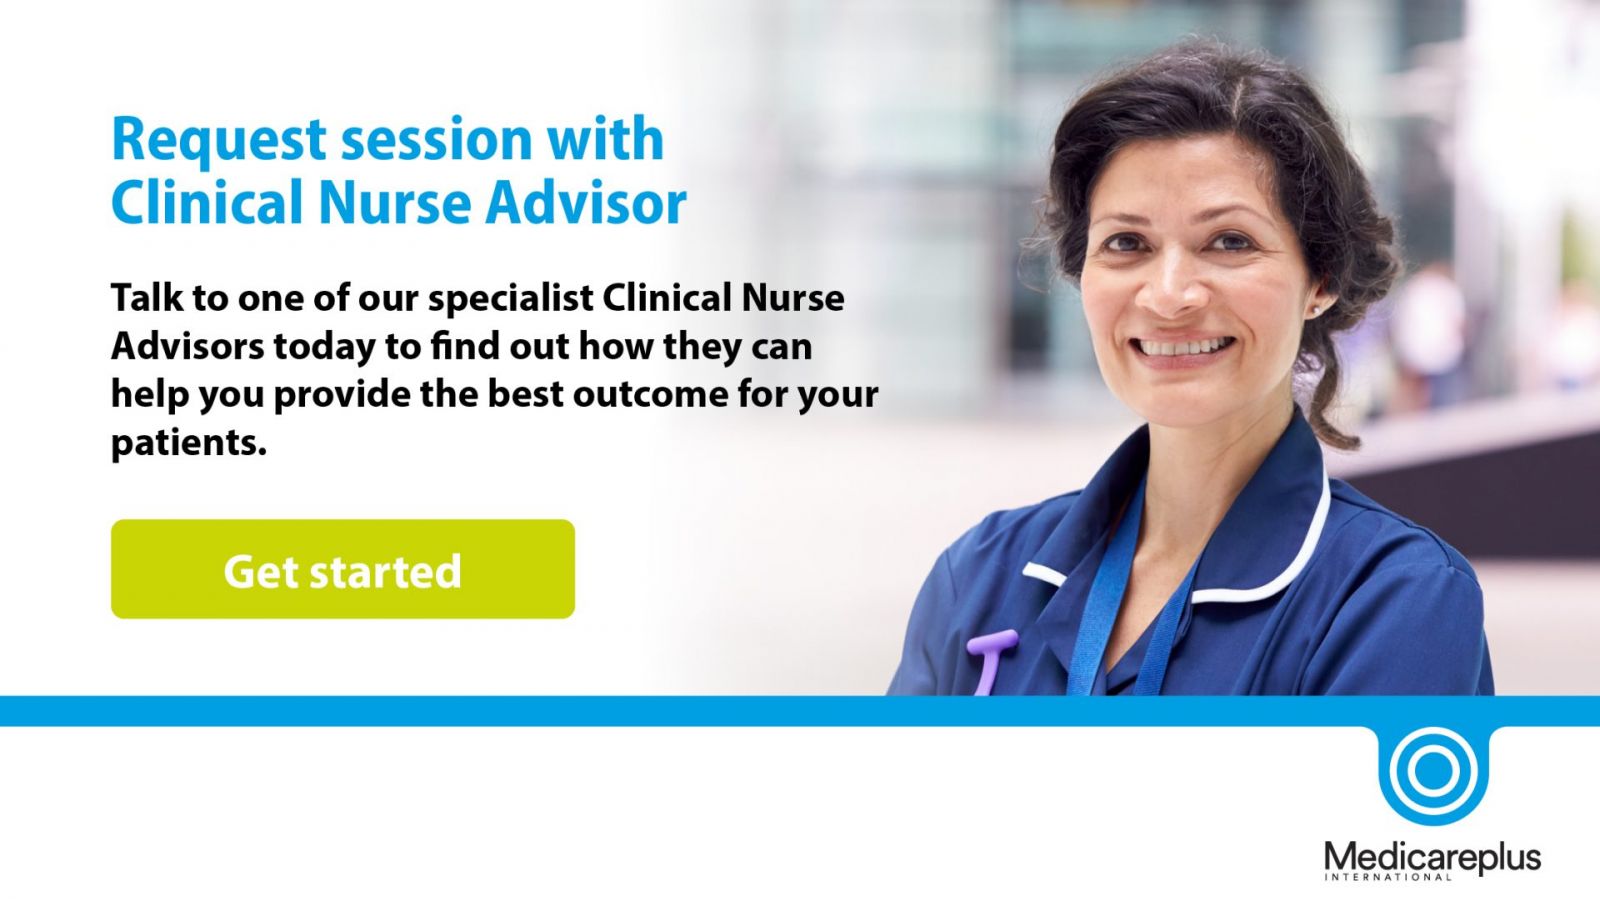 Request a session with a Clinical Nurse Advisor